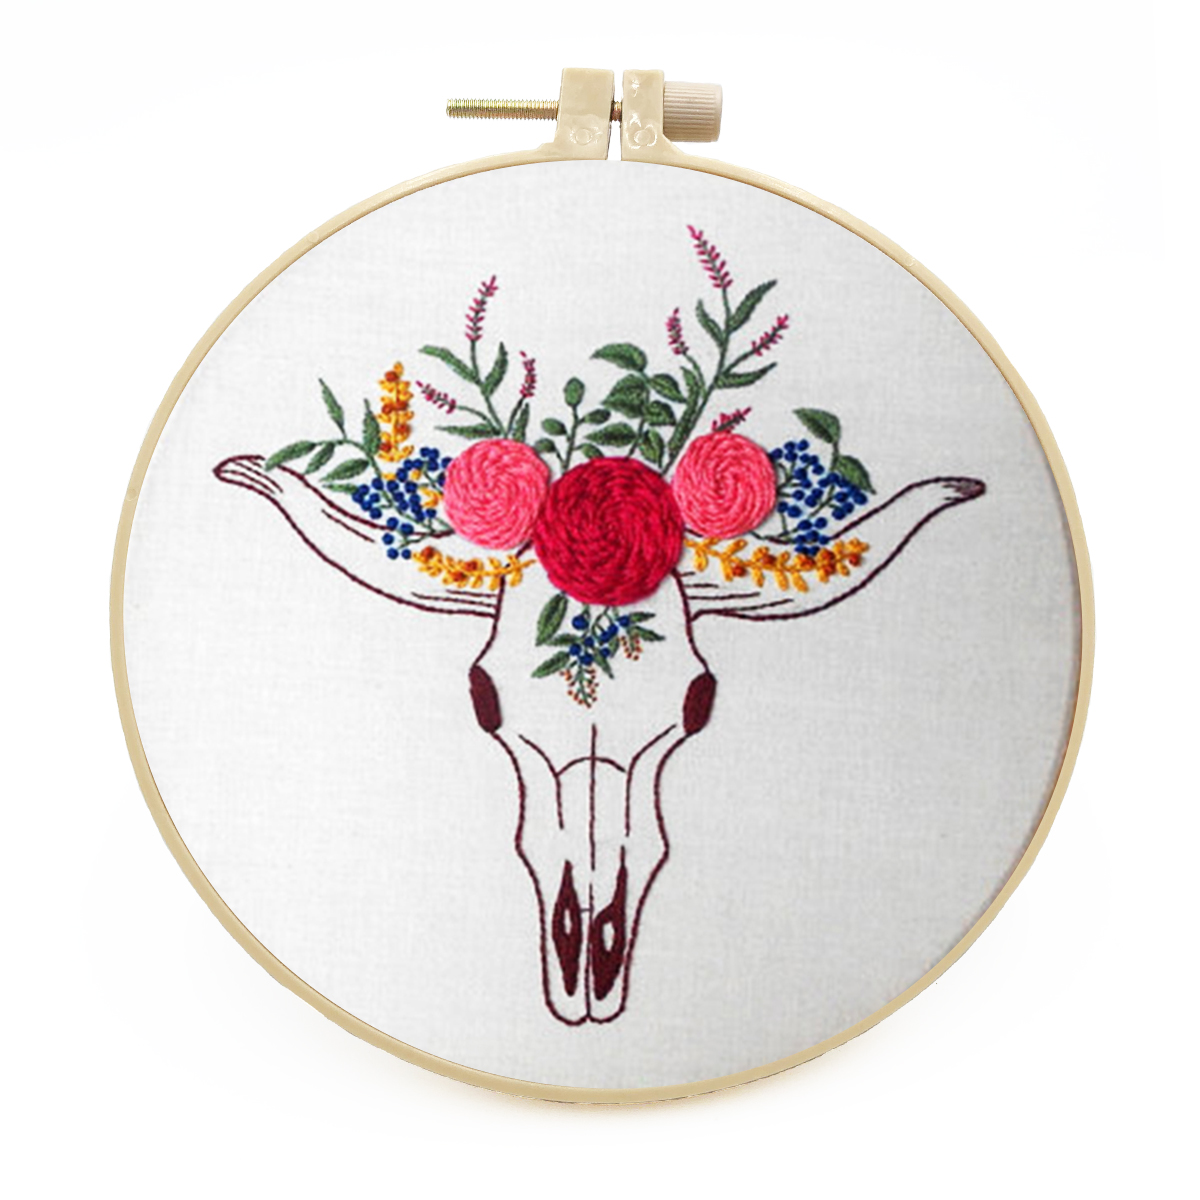 Embroidery Starter Kit Cross stitch kit for Adult Beginner - Cow Wreath pattern